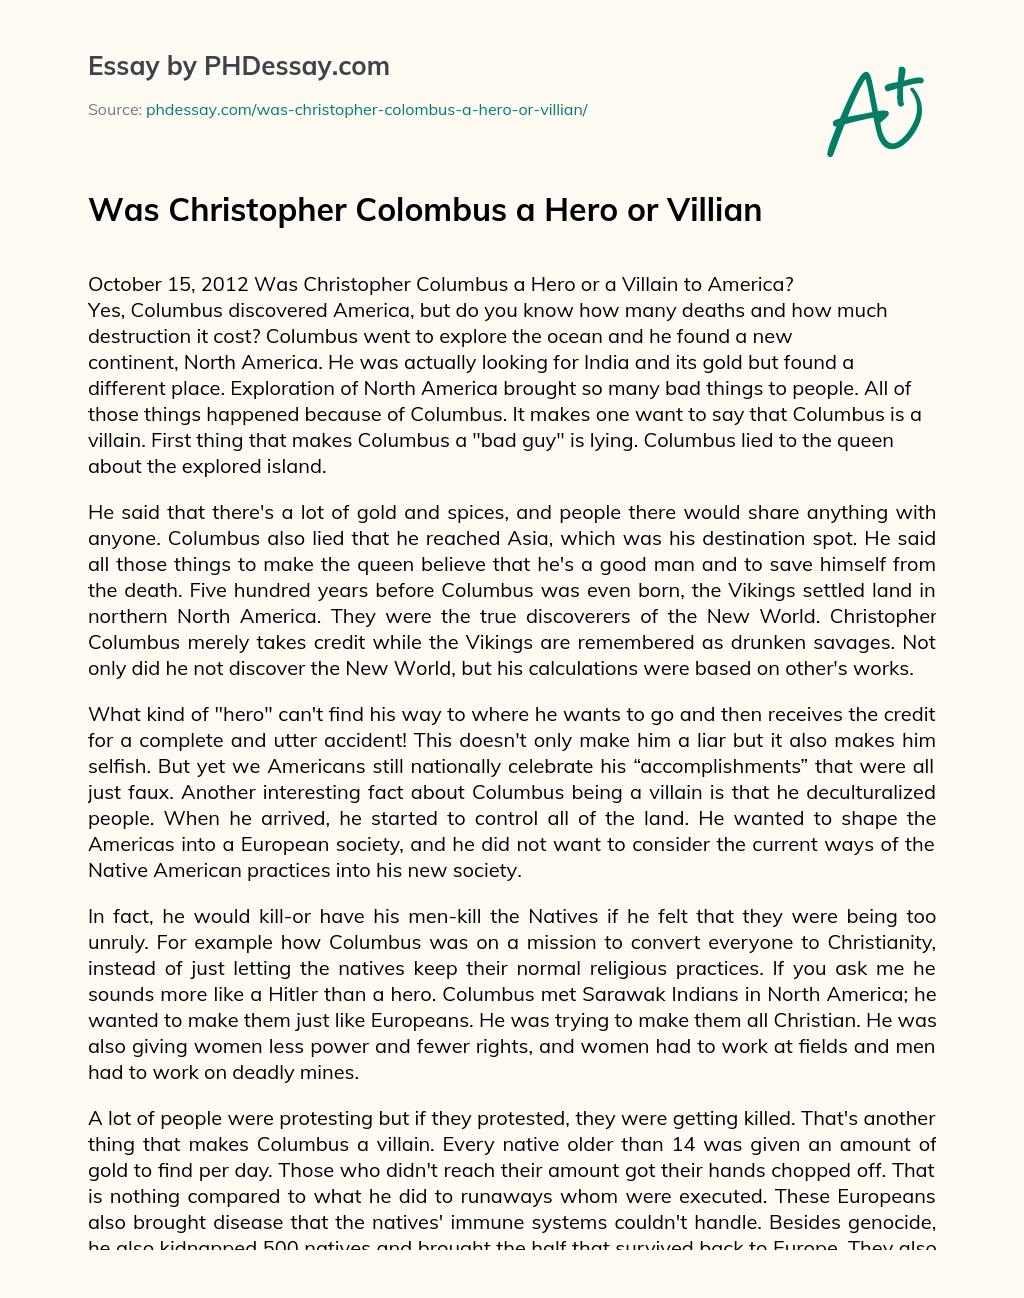 Was Christopher Colombus a Hero or Villian essay